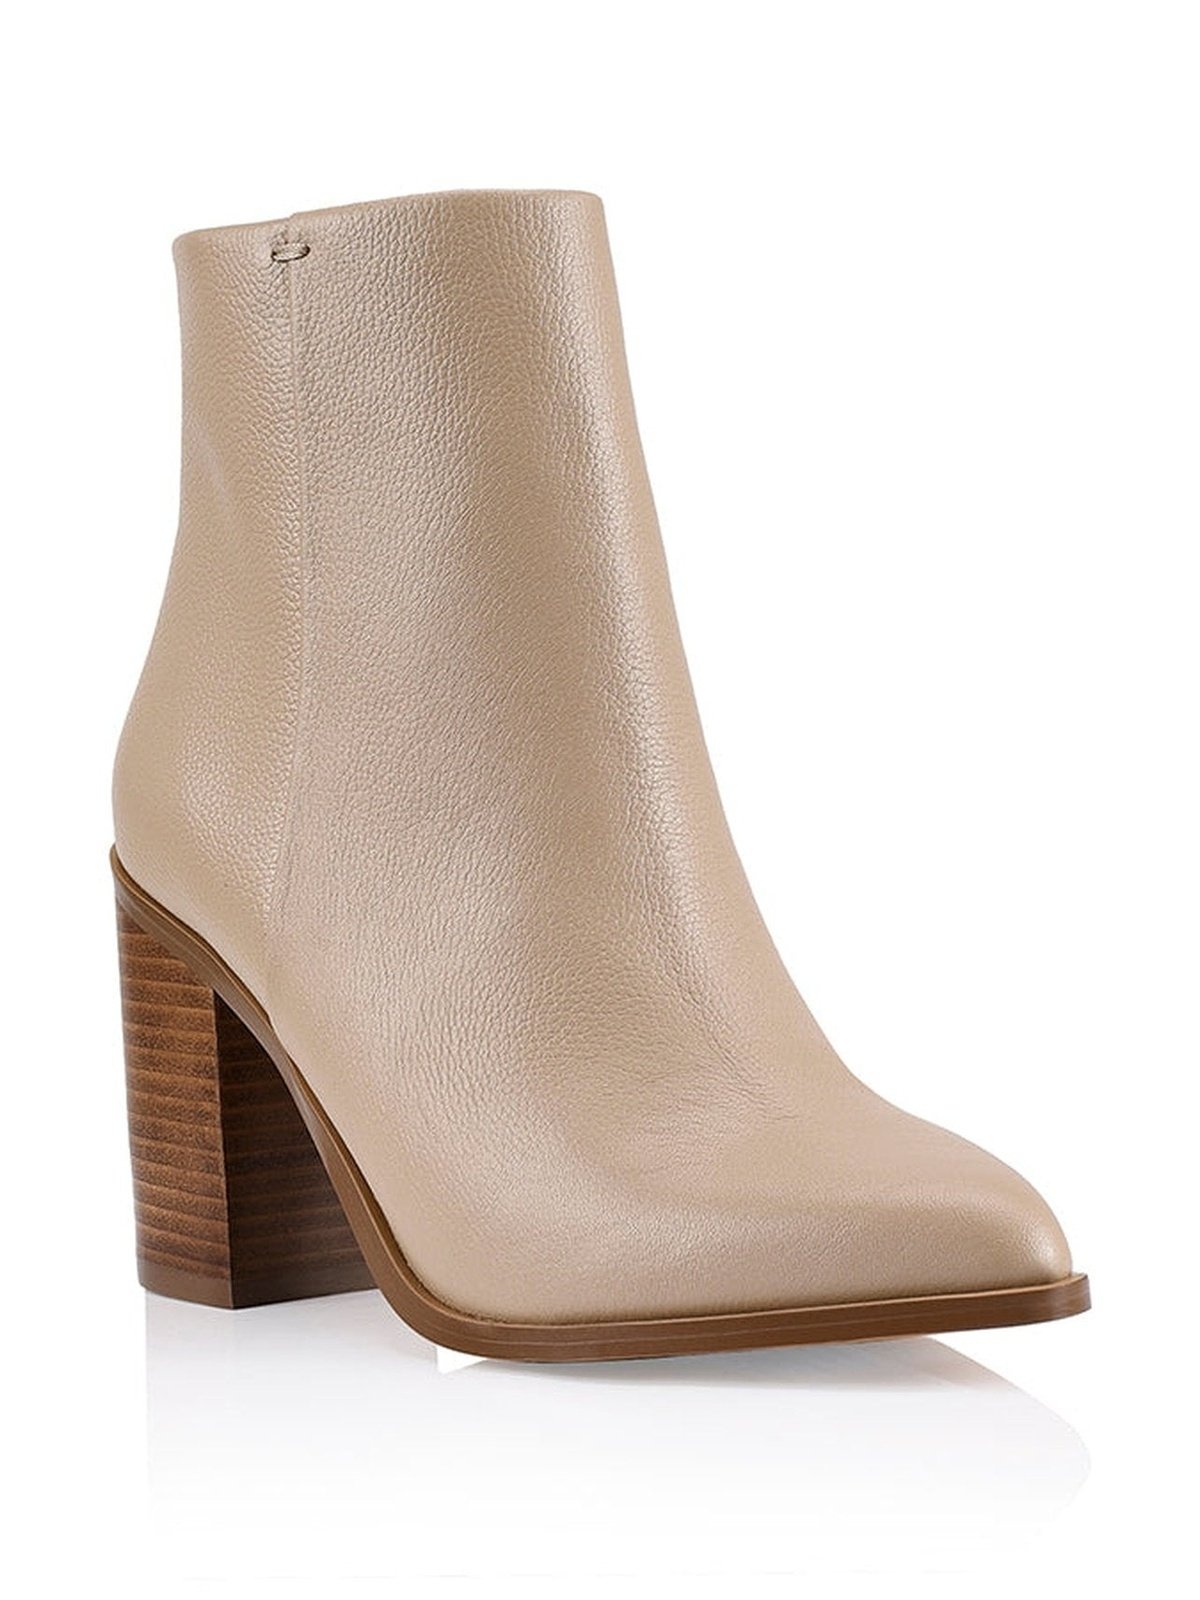 Ria Ankle Boots - Nude Leather